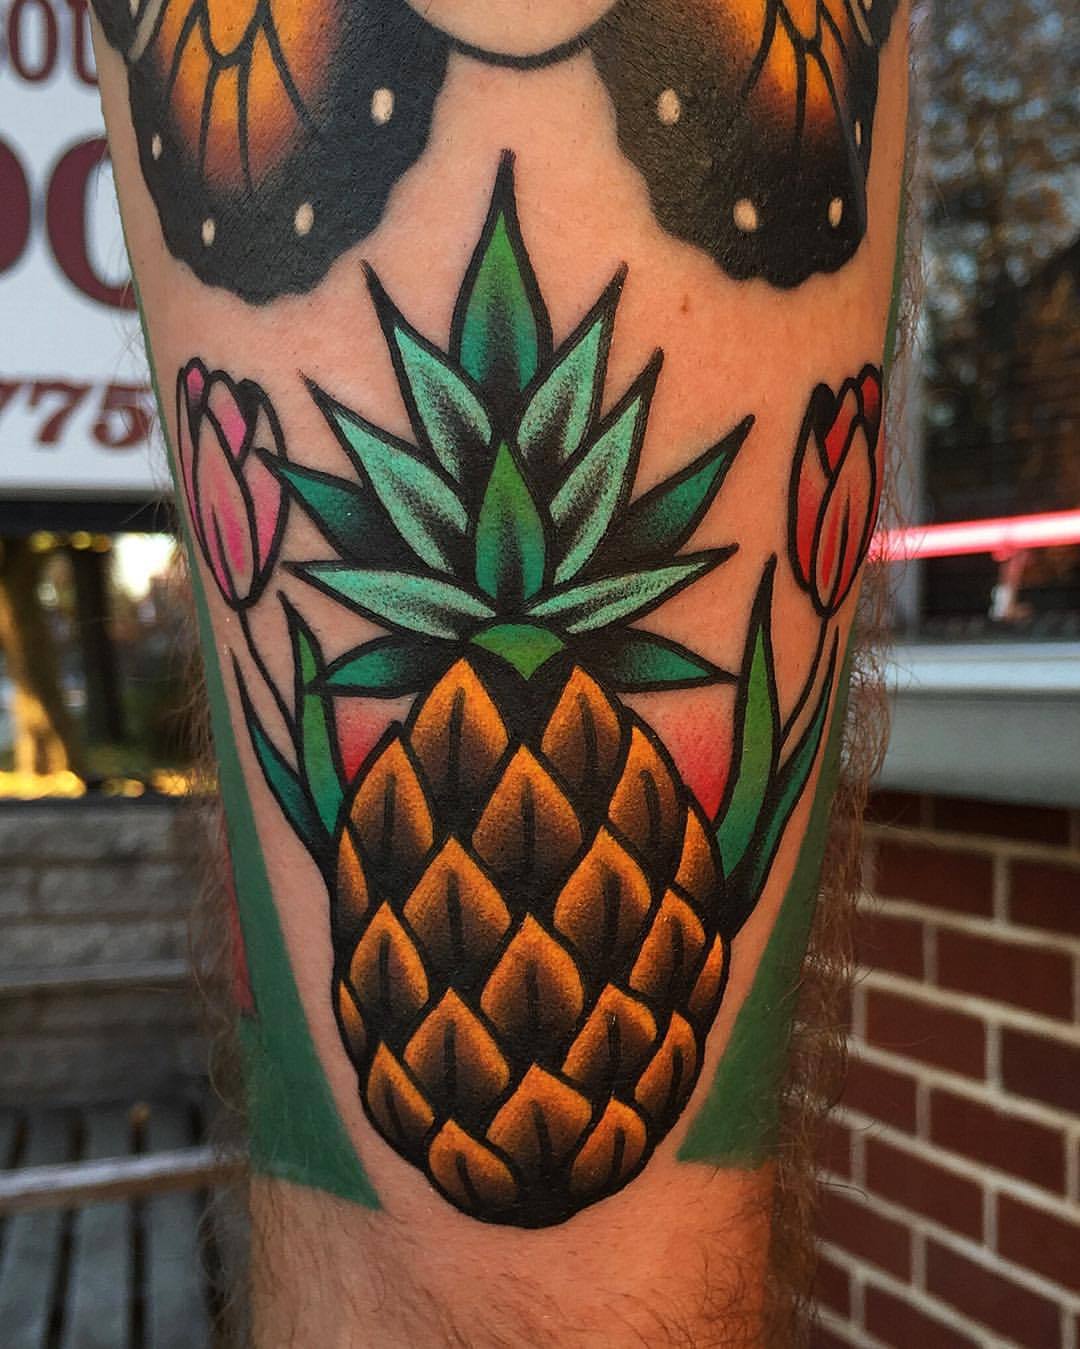 Pineapple tattoo 2023: What is the meaning behind it? 17 trendy designs to  choose from!